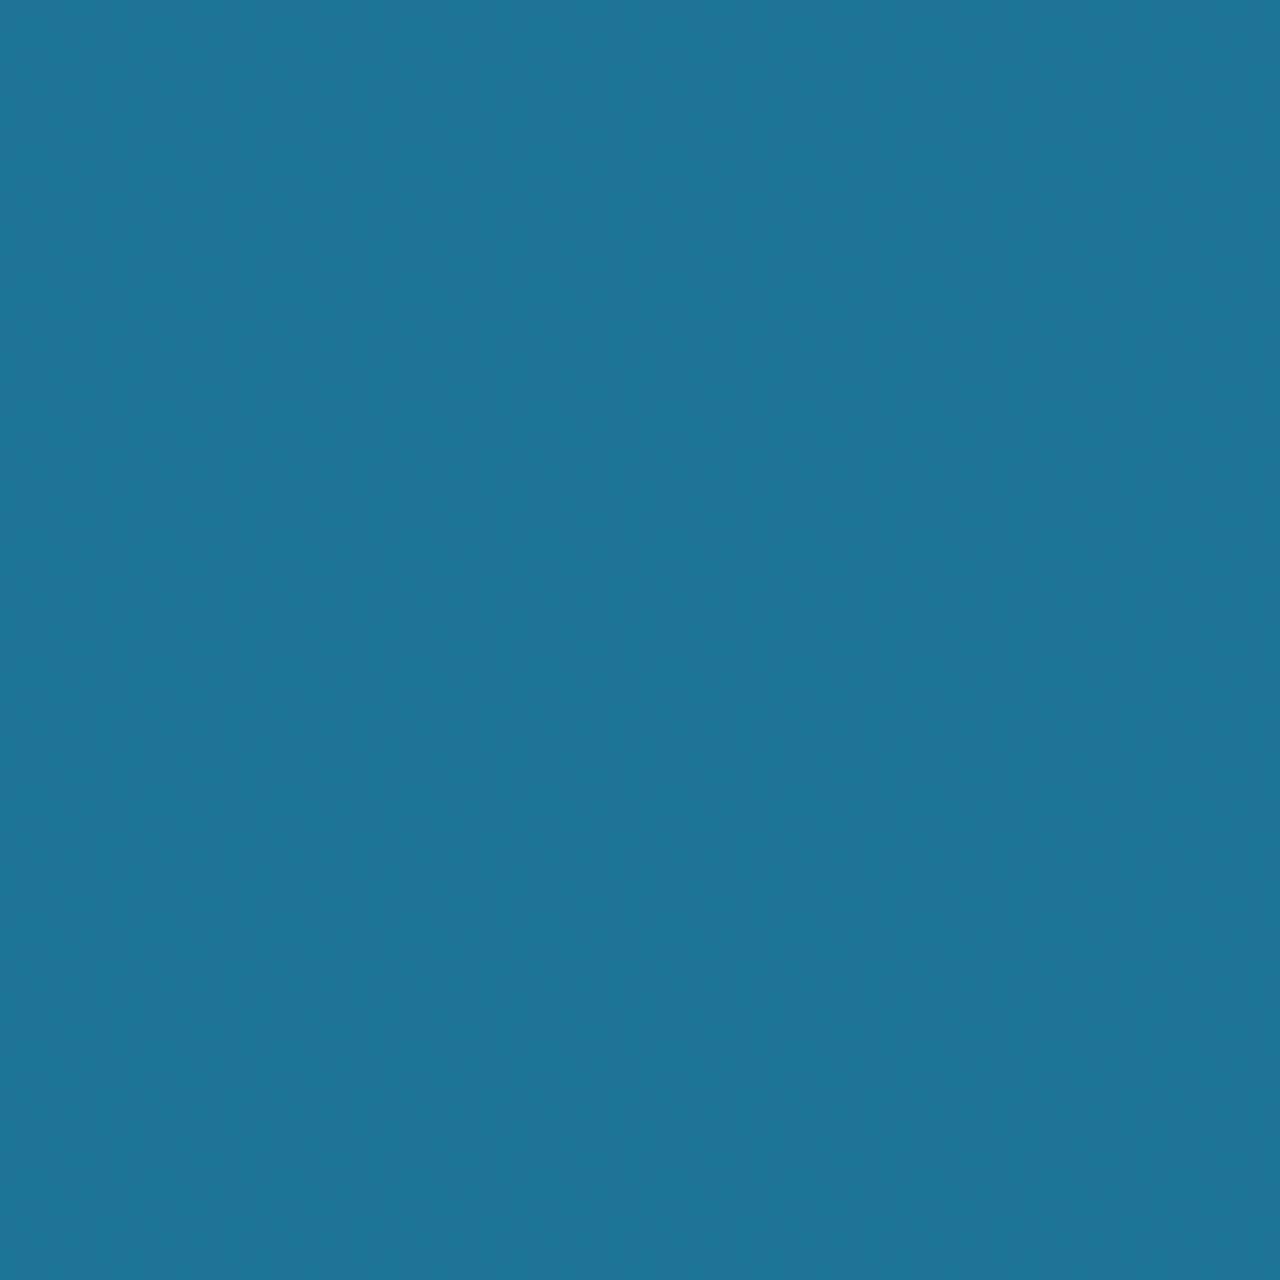 Turquoise 121-031 PBS Fabrics Painter's Palette Solids collection